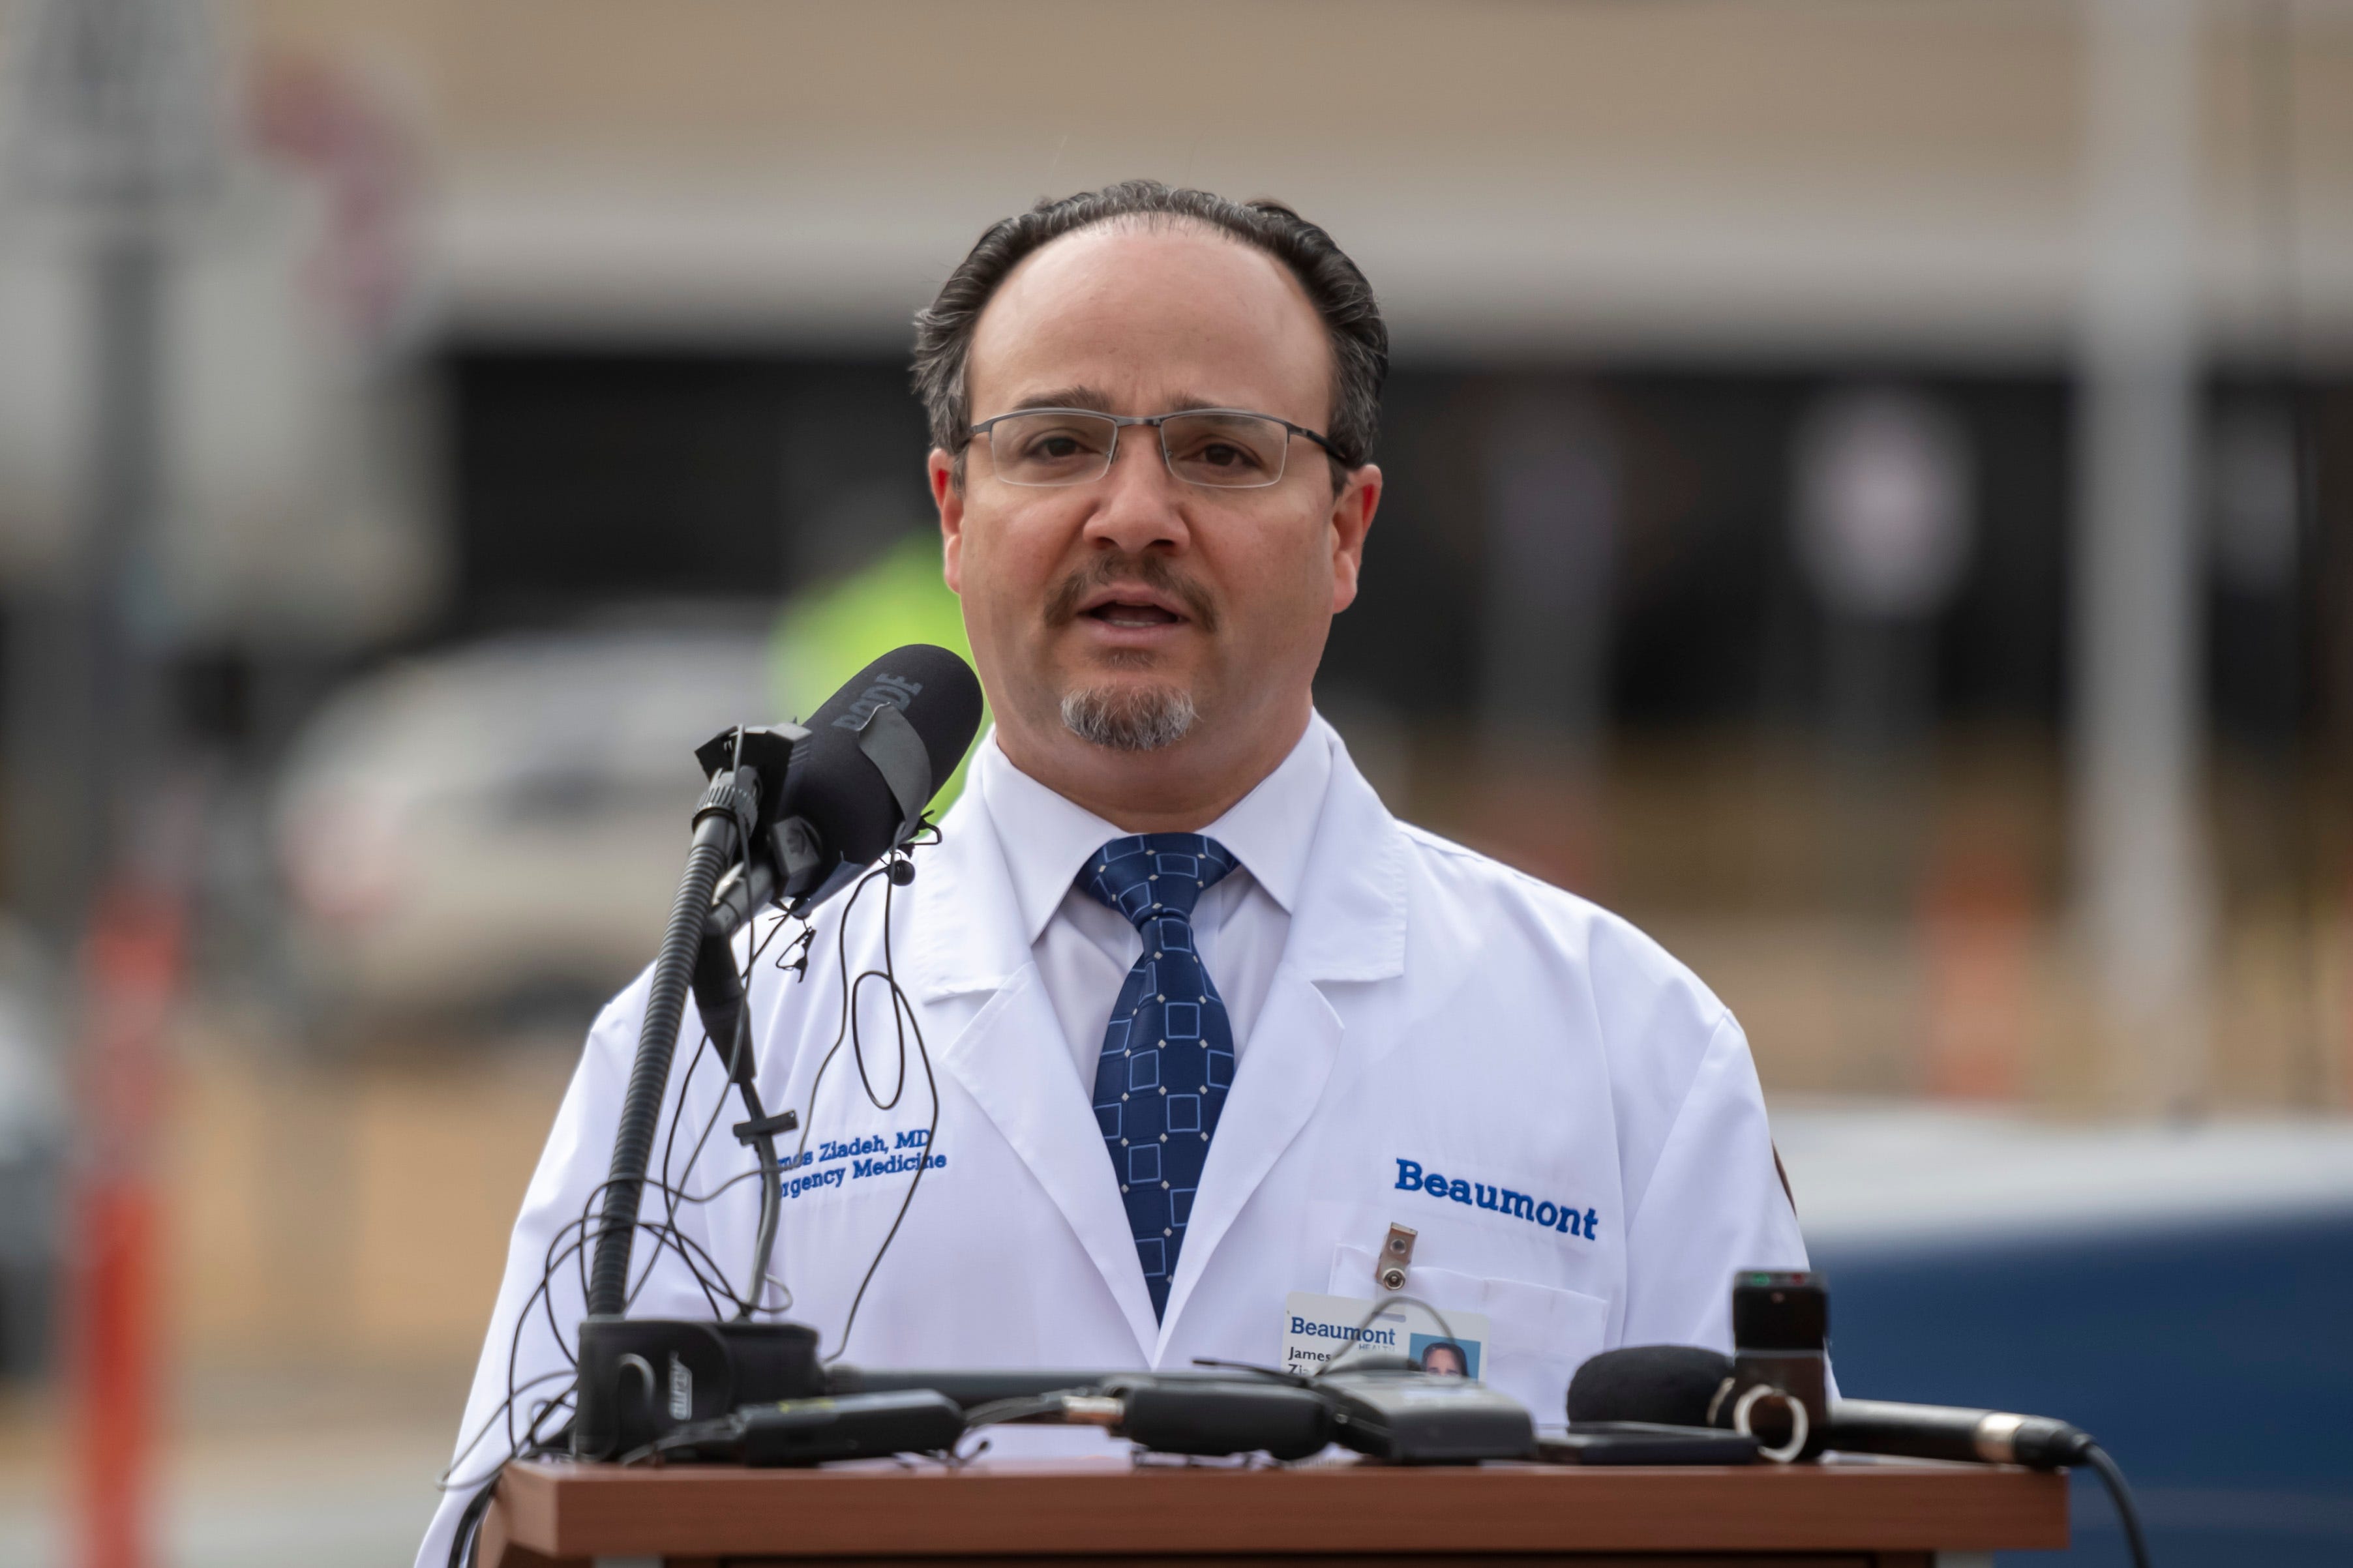 James Ziadeh, Chief of the Department of Emergency Medicine at Beaumont Royal Oak, speaks during a press conference at the hospital, March 16, 2020. Members of the public concerned that they may be infected with the coronavirus were able to get screening done from their vehicles.